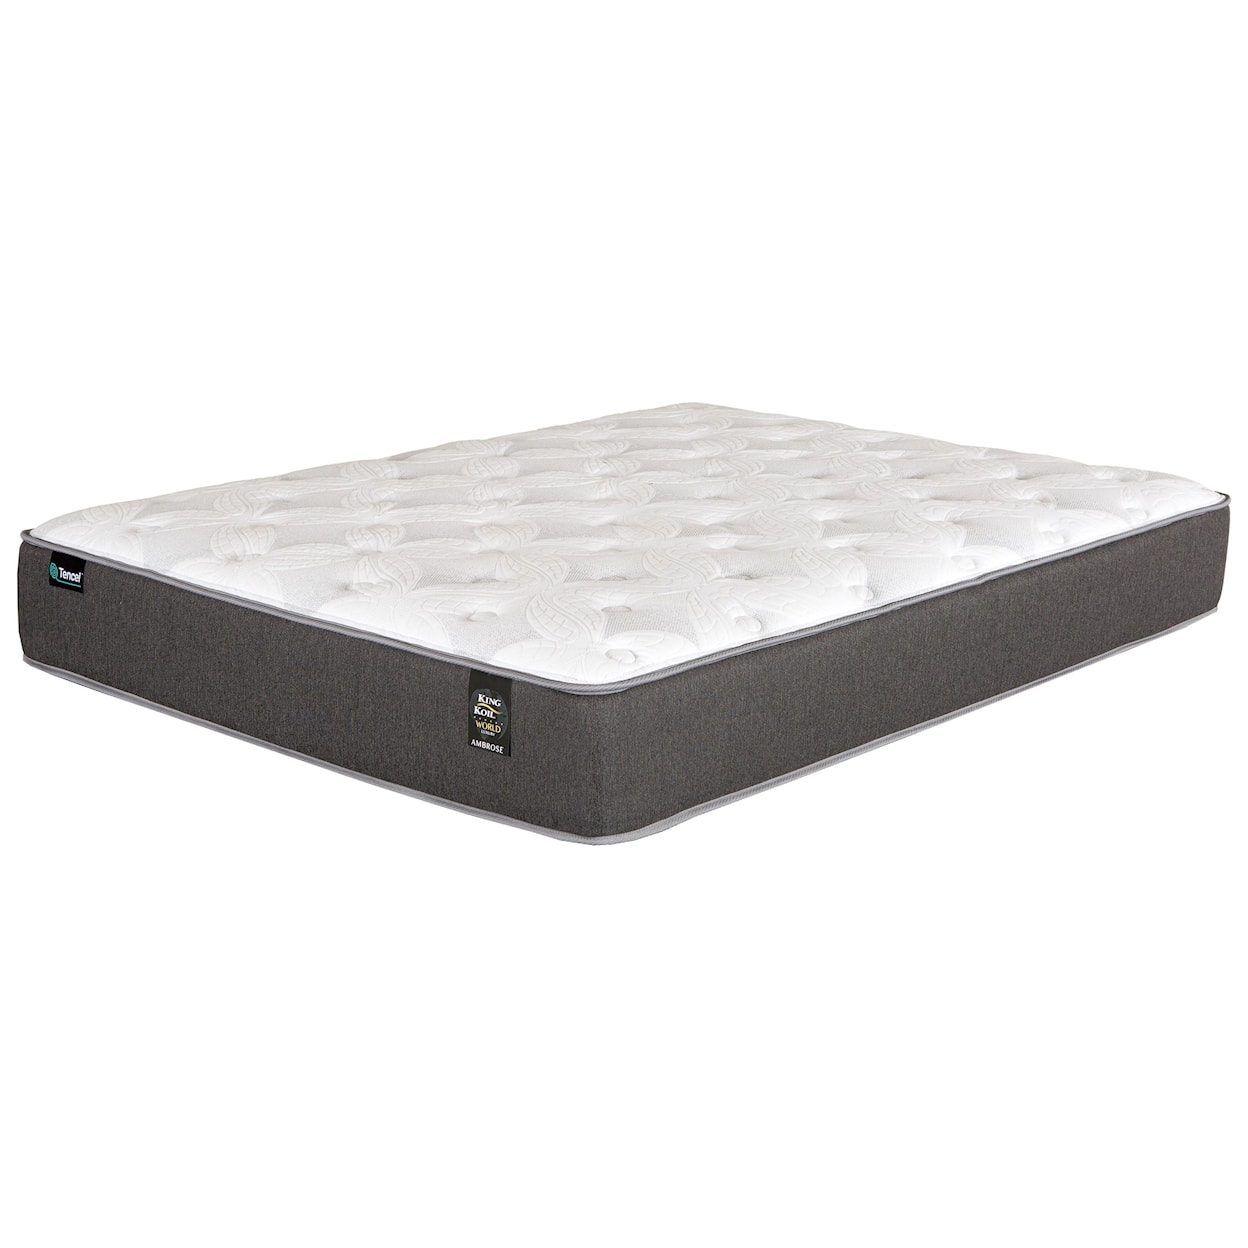 King Koil Lancaster P Twin Pocketed Coil Mattress